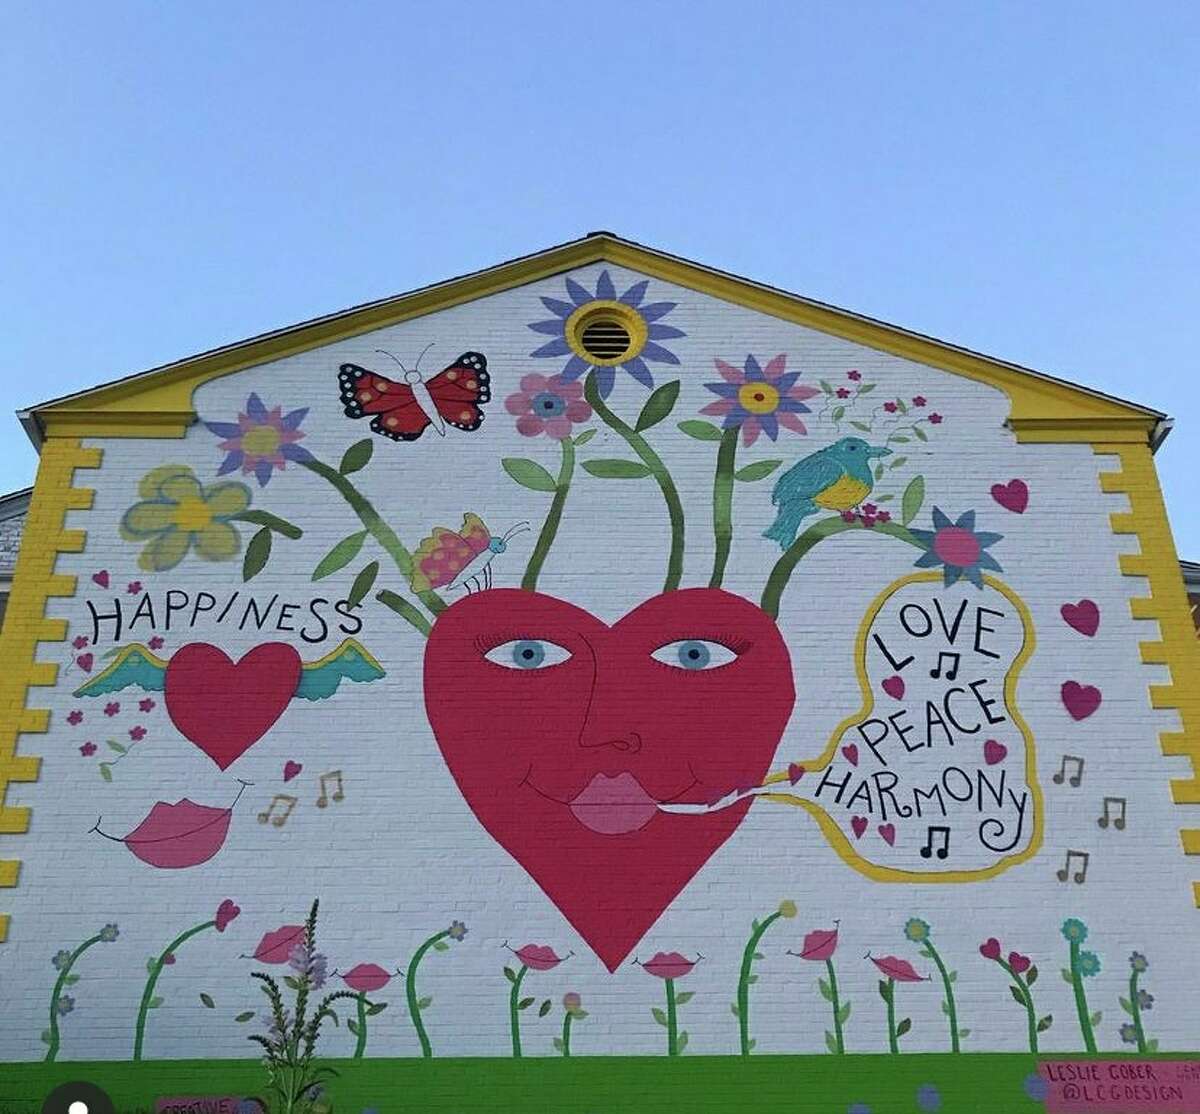 The "LOVE.PEACE.HARMONY" mural at the Circle Inn, painted by Leslie Cober.